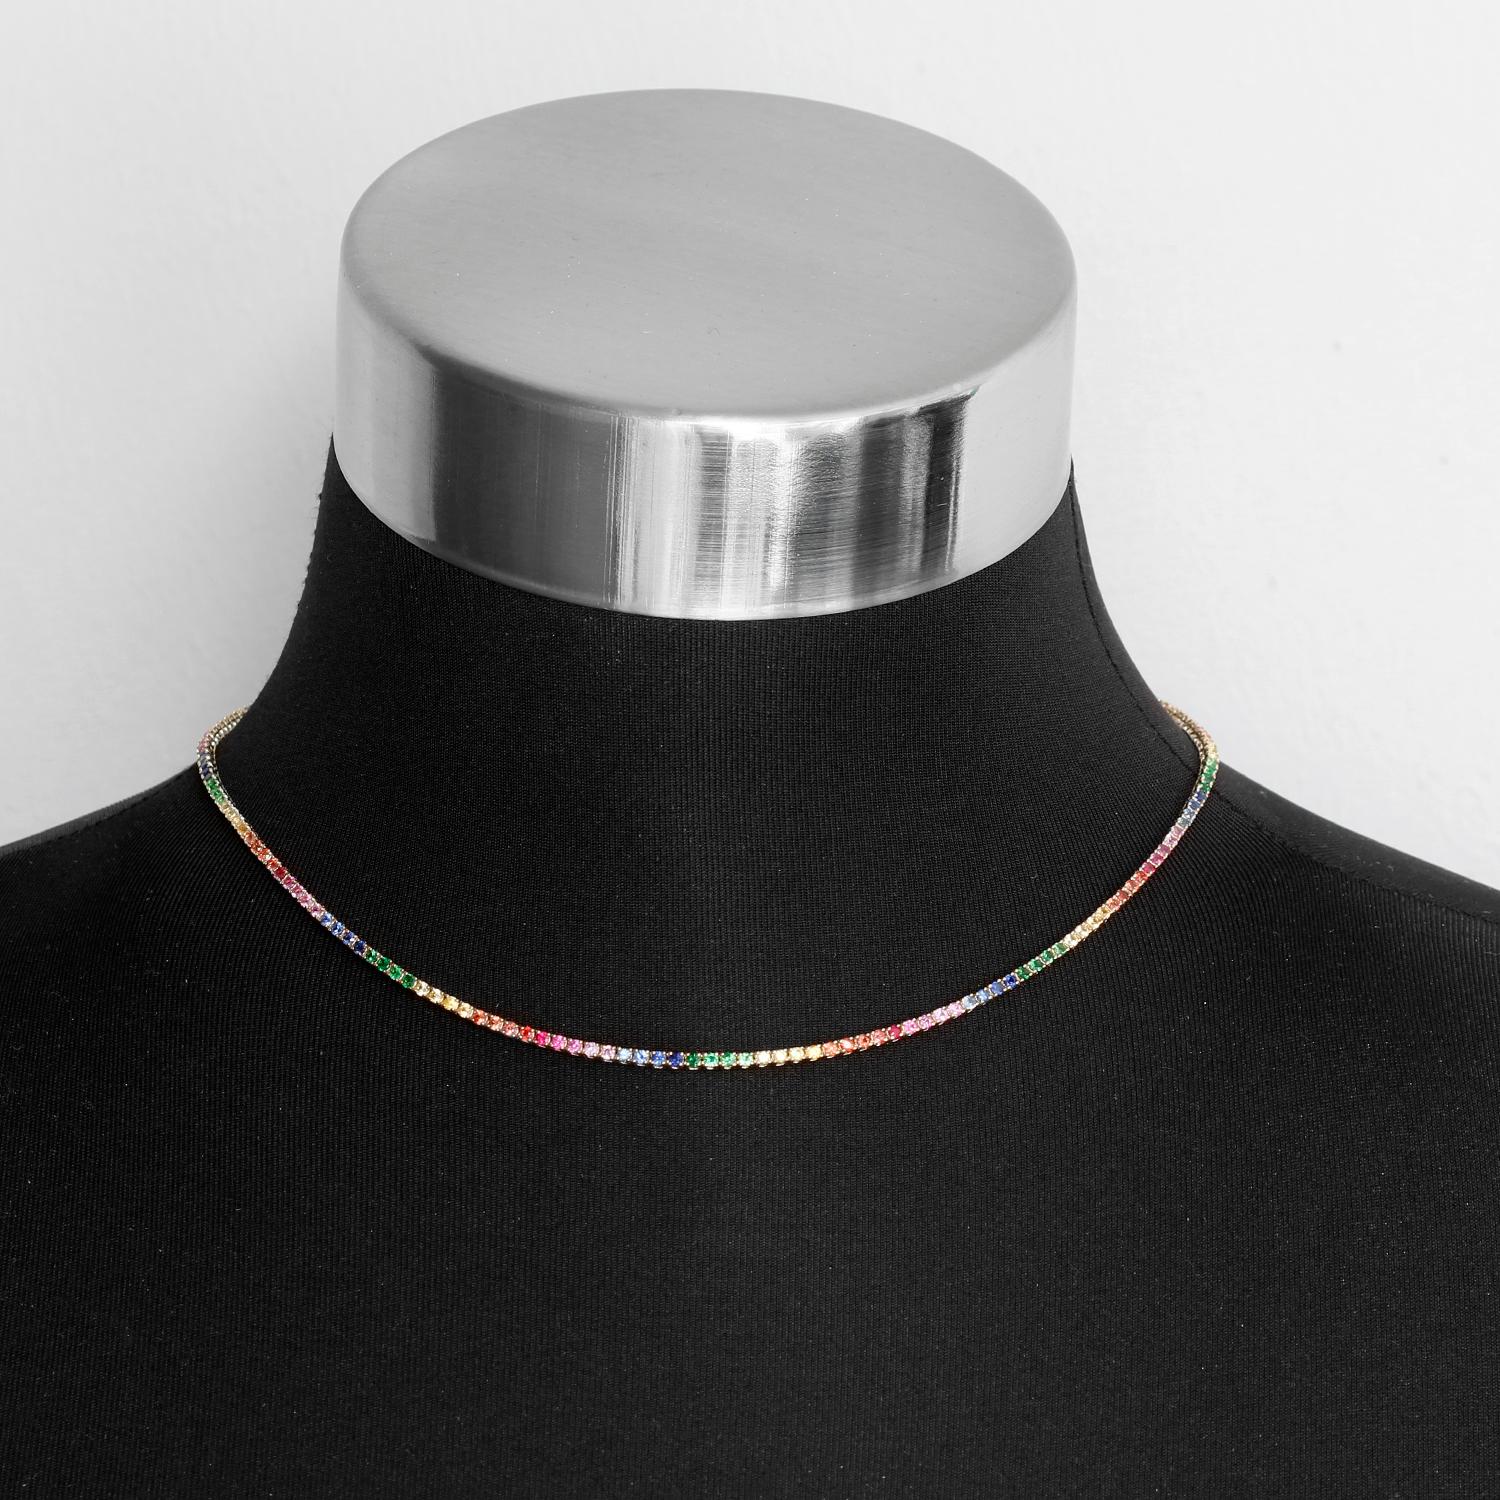 14K Yellow Gold Rainbow Sapphire Necklace - 14K Yellow gold Multicolored gradient Sapphires. 189 Sapphires weighing 5.88 cts. 16 inches long. Total weight 11.6 grams.
The classic piece you've always had your eyes on, our tennis bracelet looks fresh